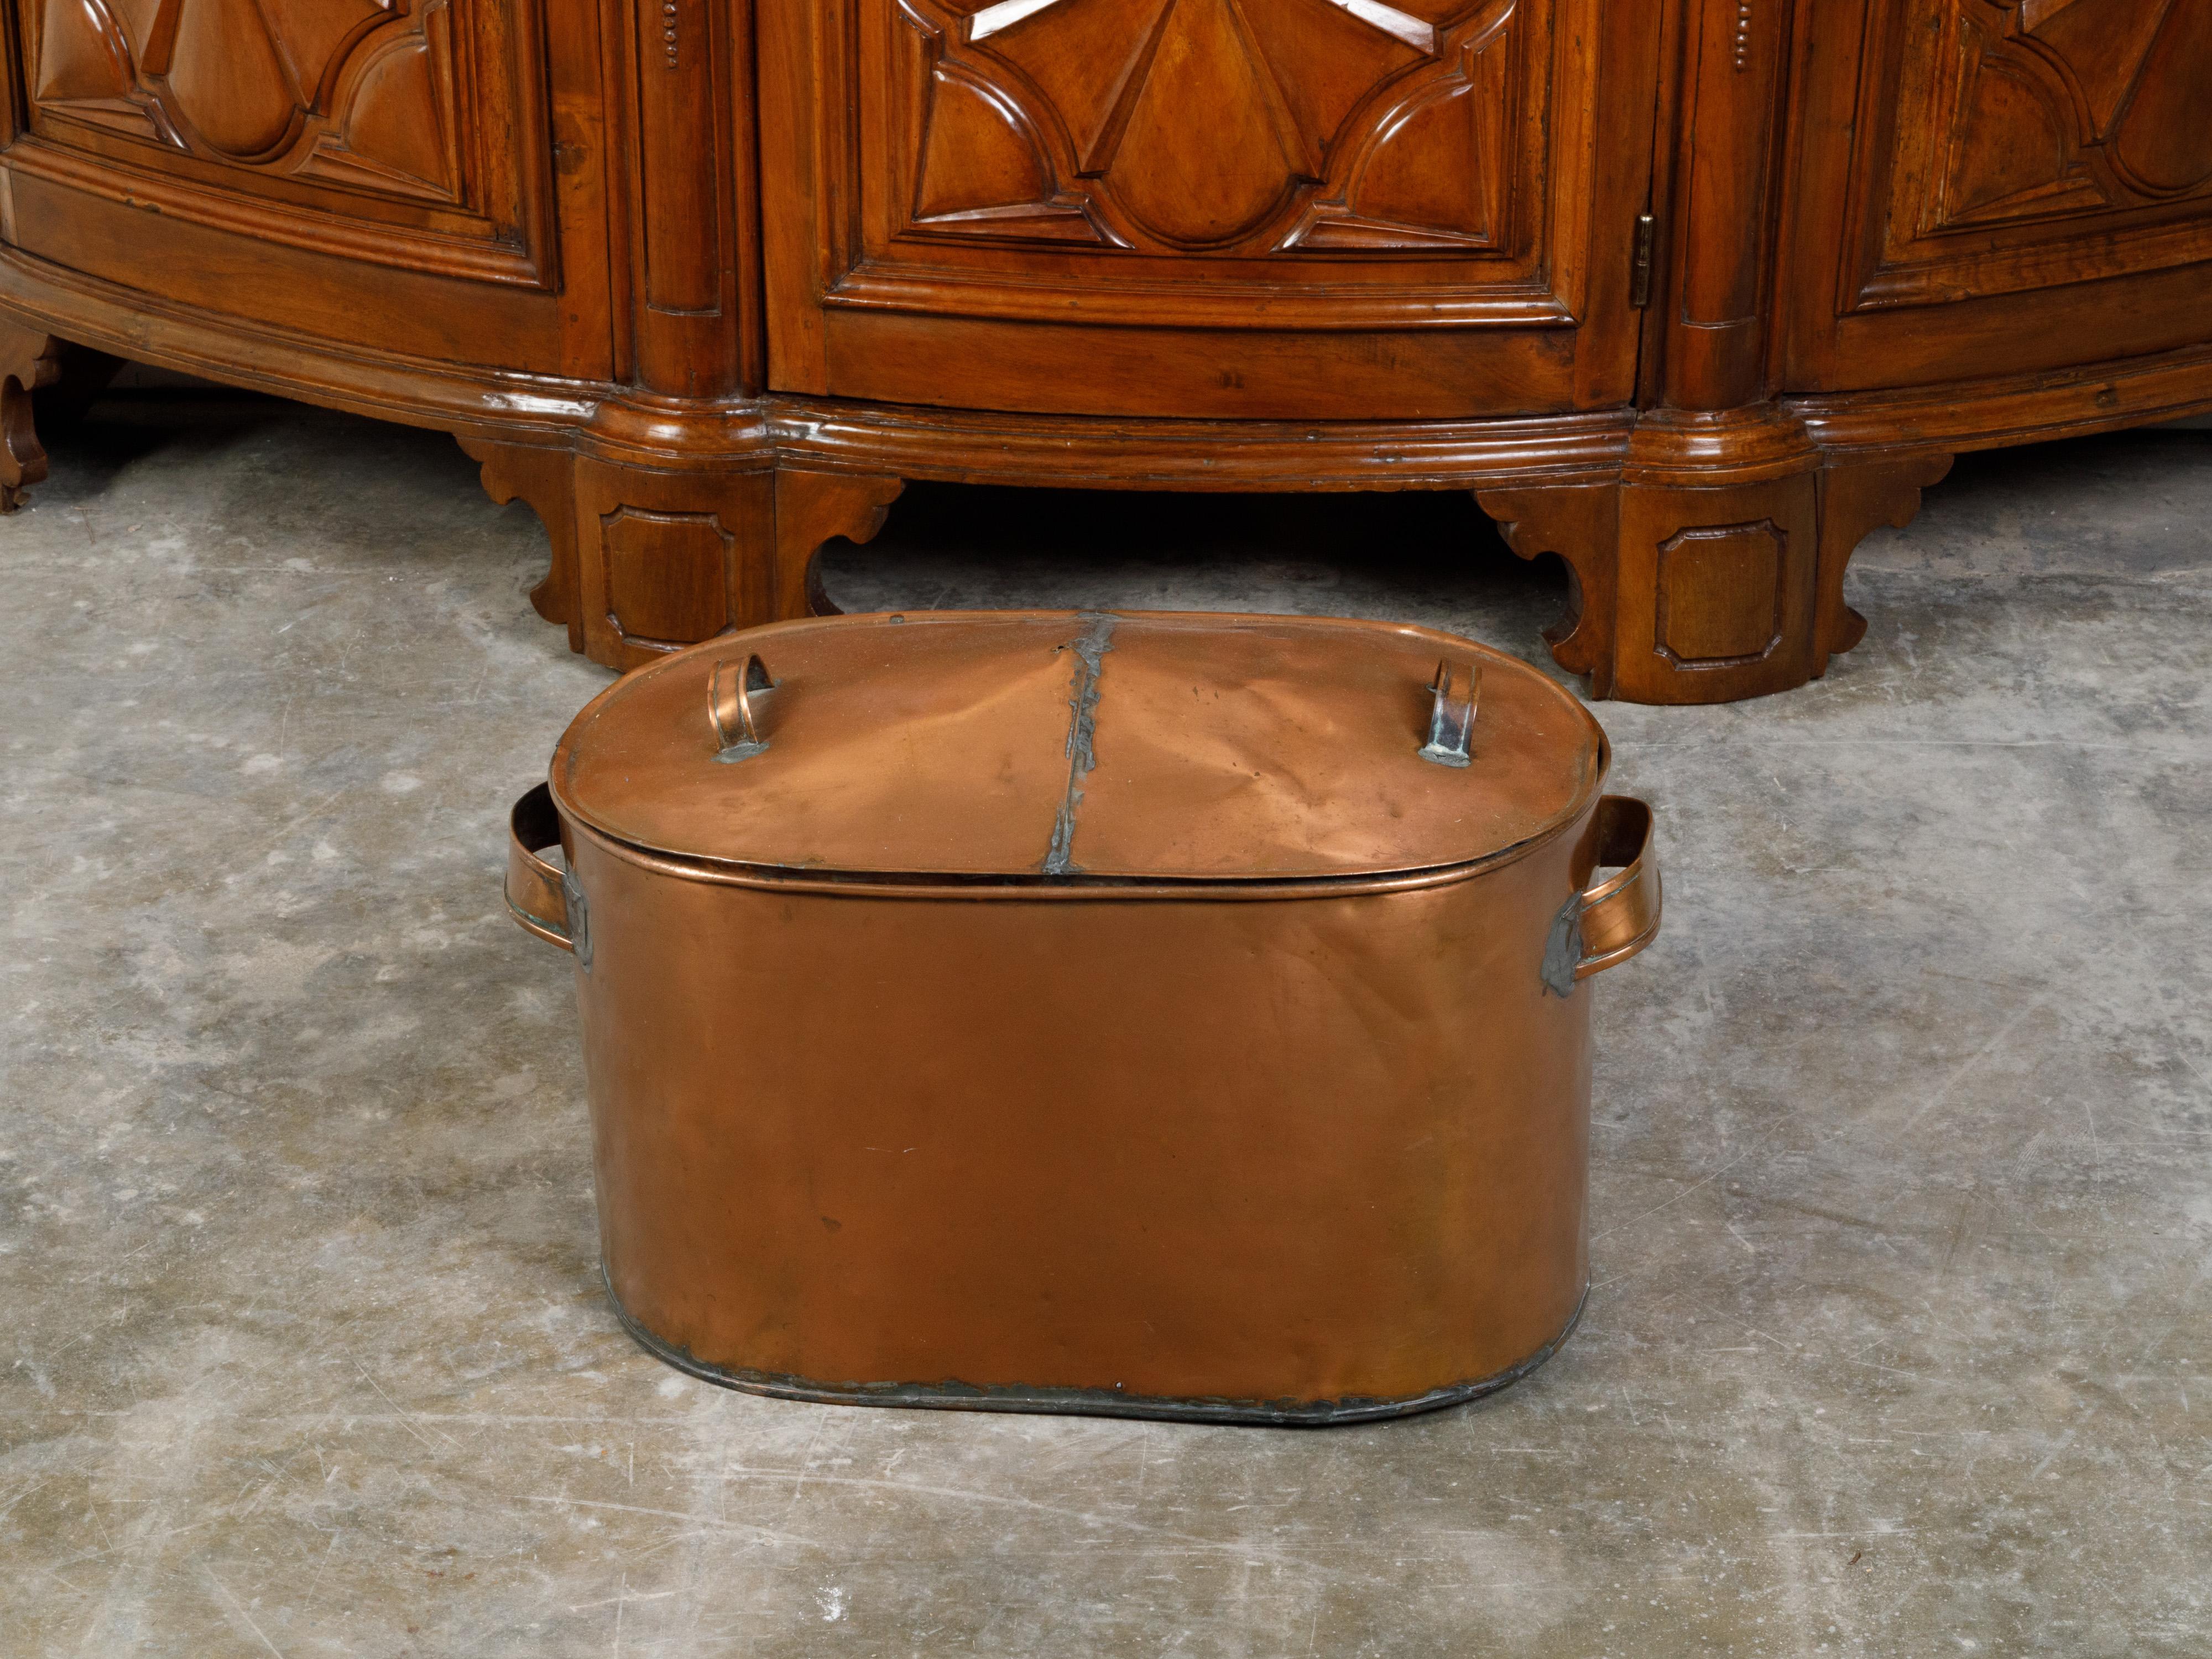 A large English copper braising pan from the mid 20th century, with lateral and top handles and weathered patina. Created in England during the second quarter of the 20th century, this large braising pan used to cook meat and vegetables will make